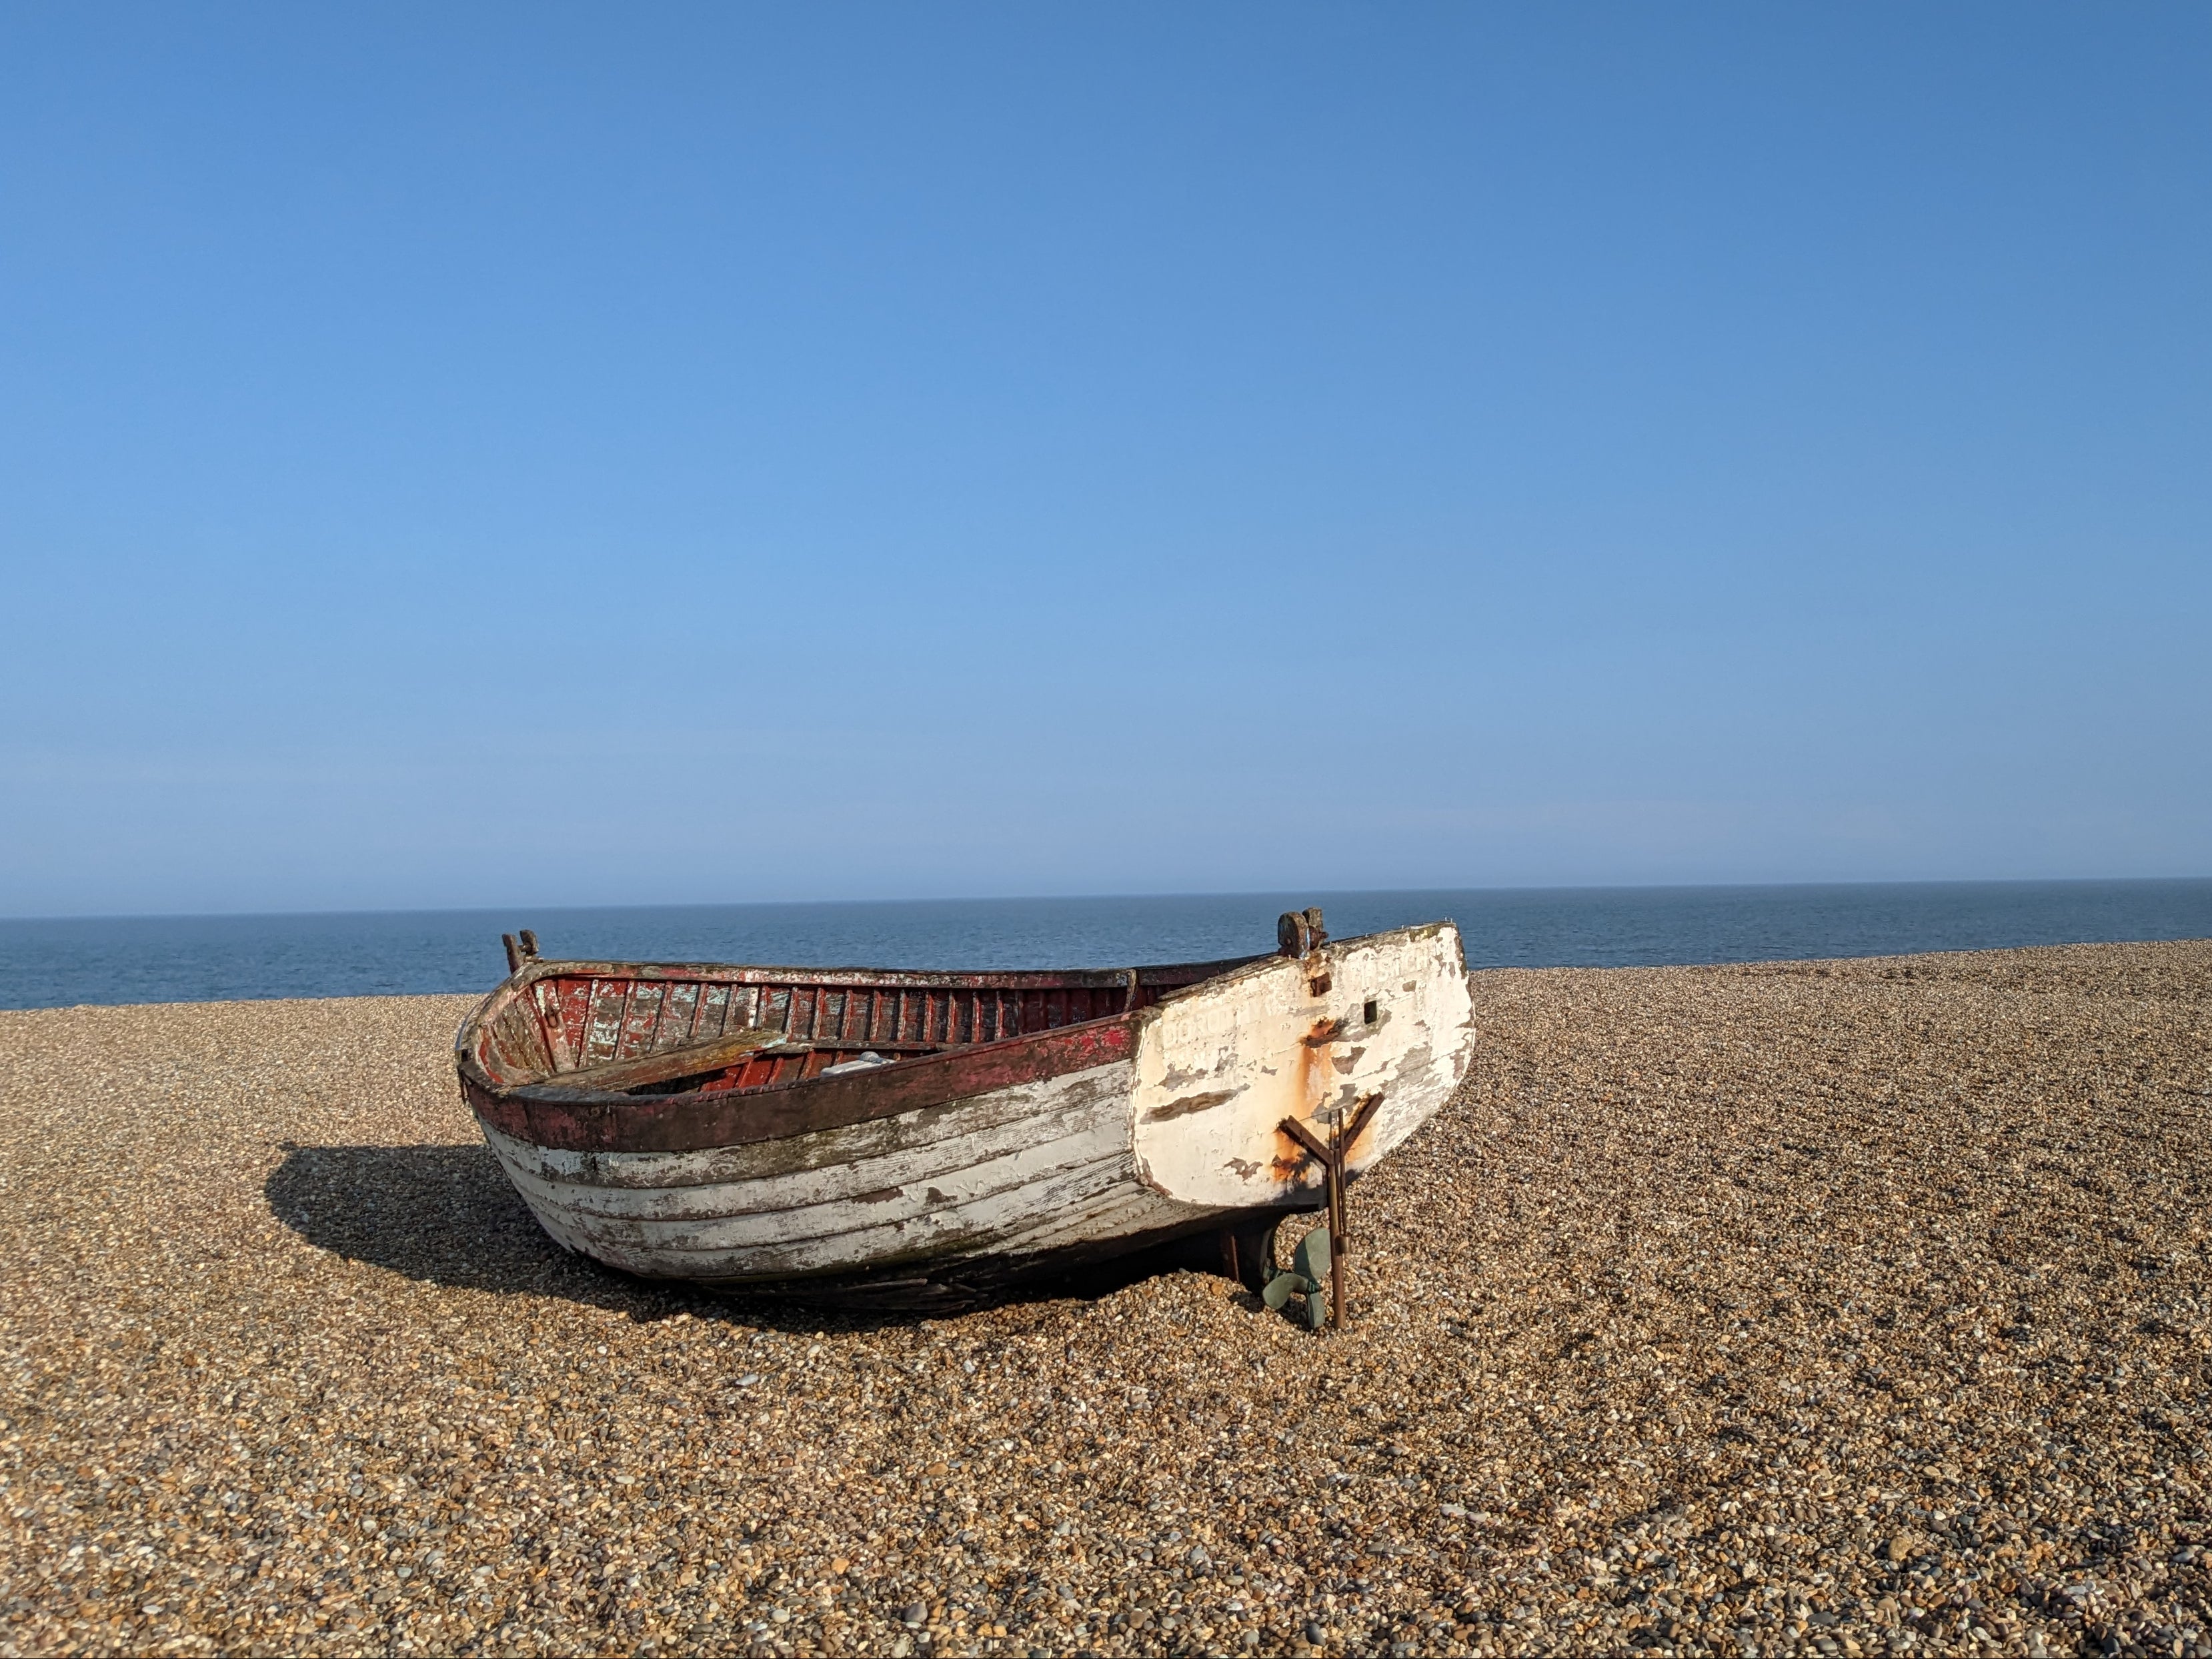 Aldeburgh highlights include a bracing coastal walk and fish and chips on the beach